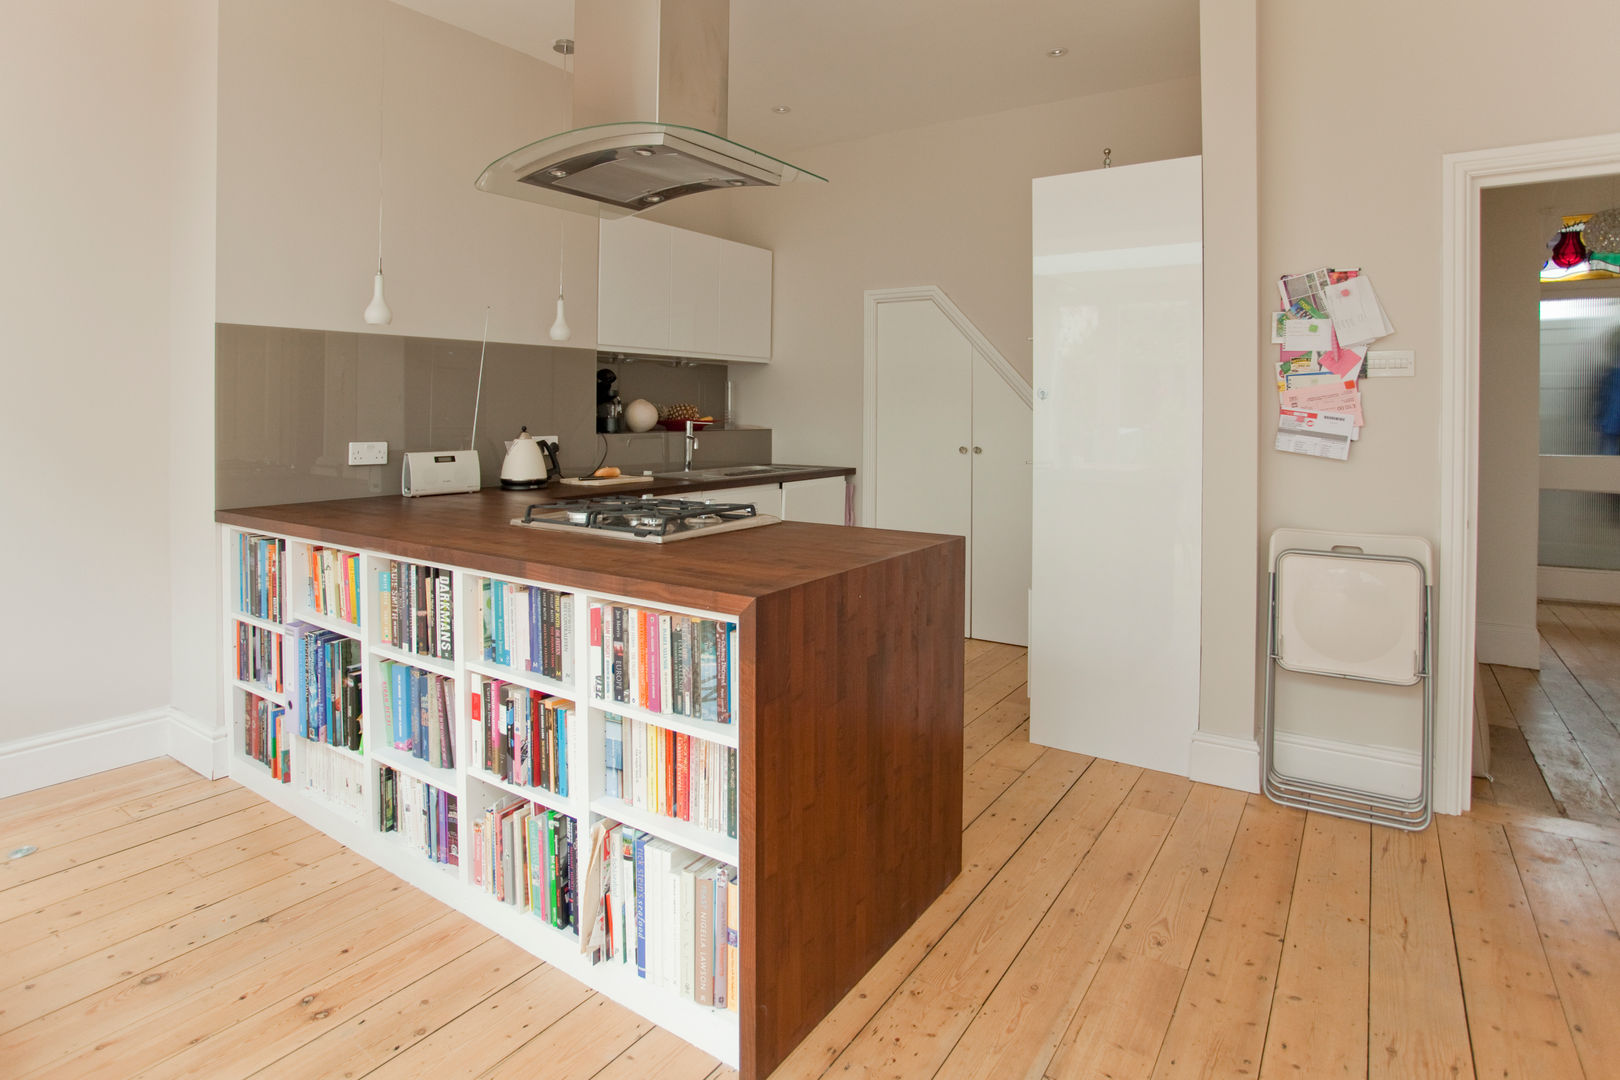 Rear extension and remodelling in Central Bristol Dittrich Hudson Vasetti Architects Modern kitchen